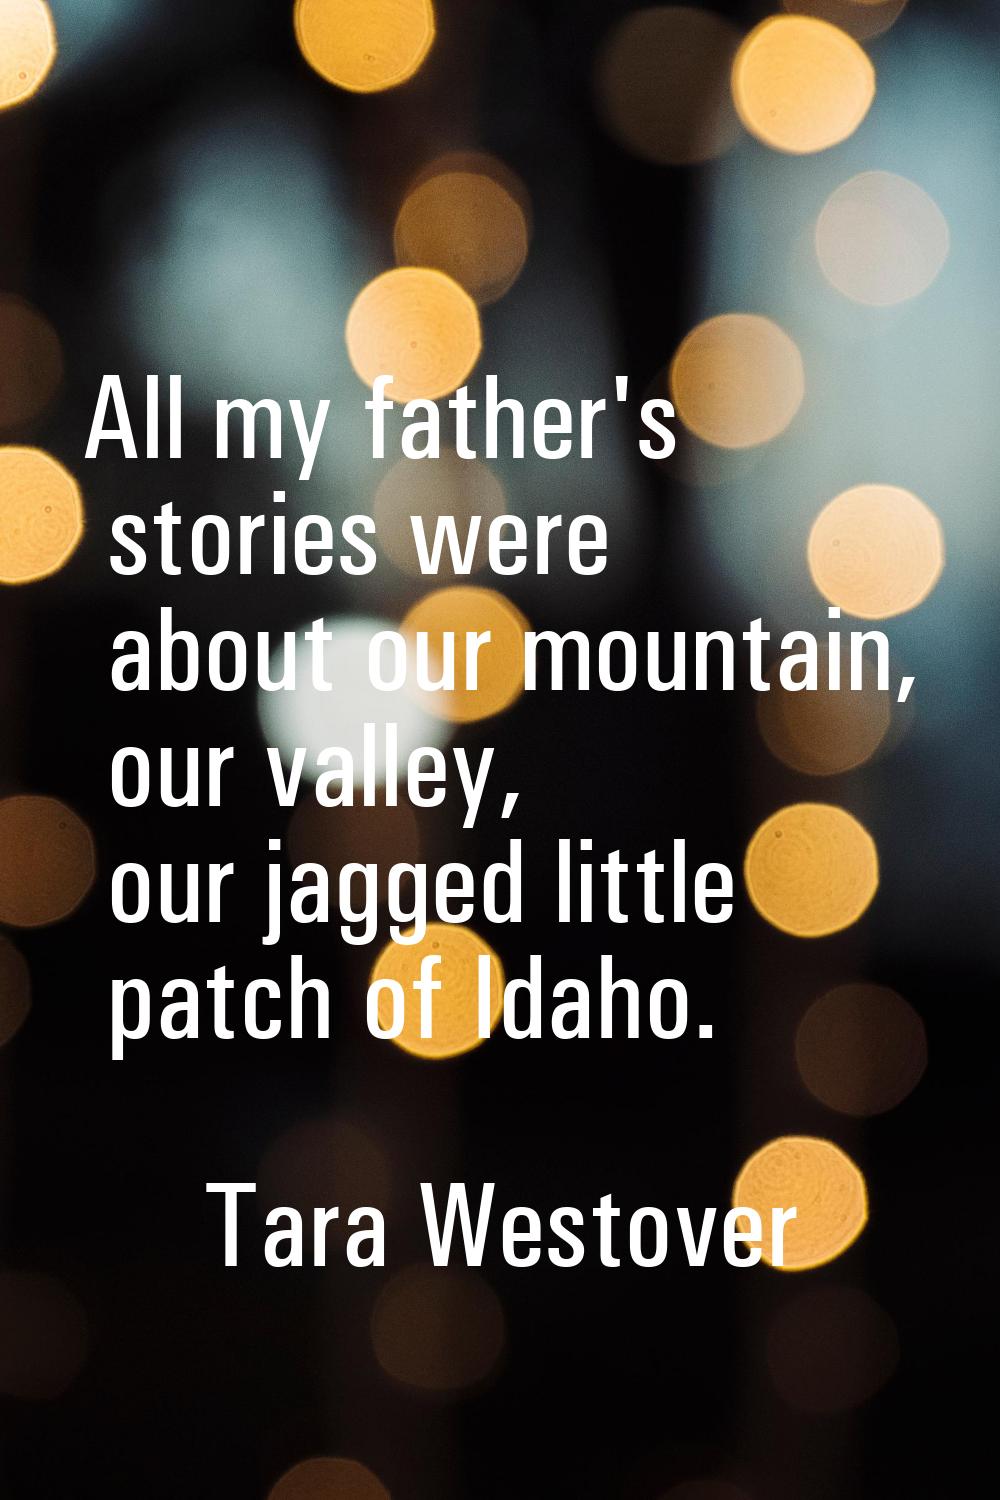 All my father's stories were about our mountain, our valley, our jagged little patch of Idaho.